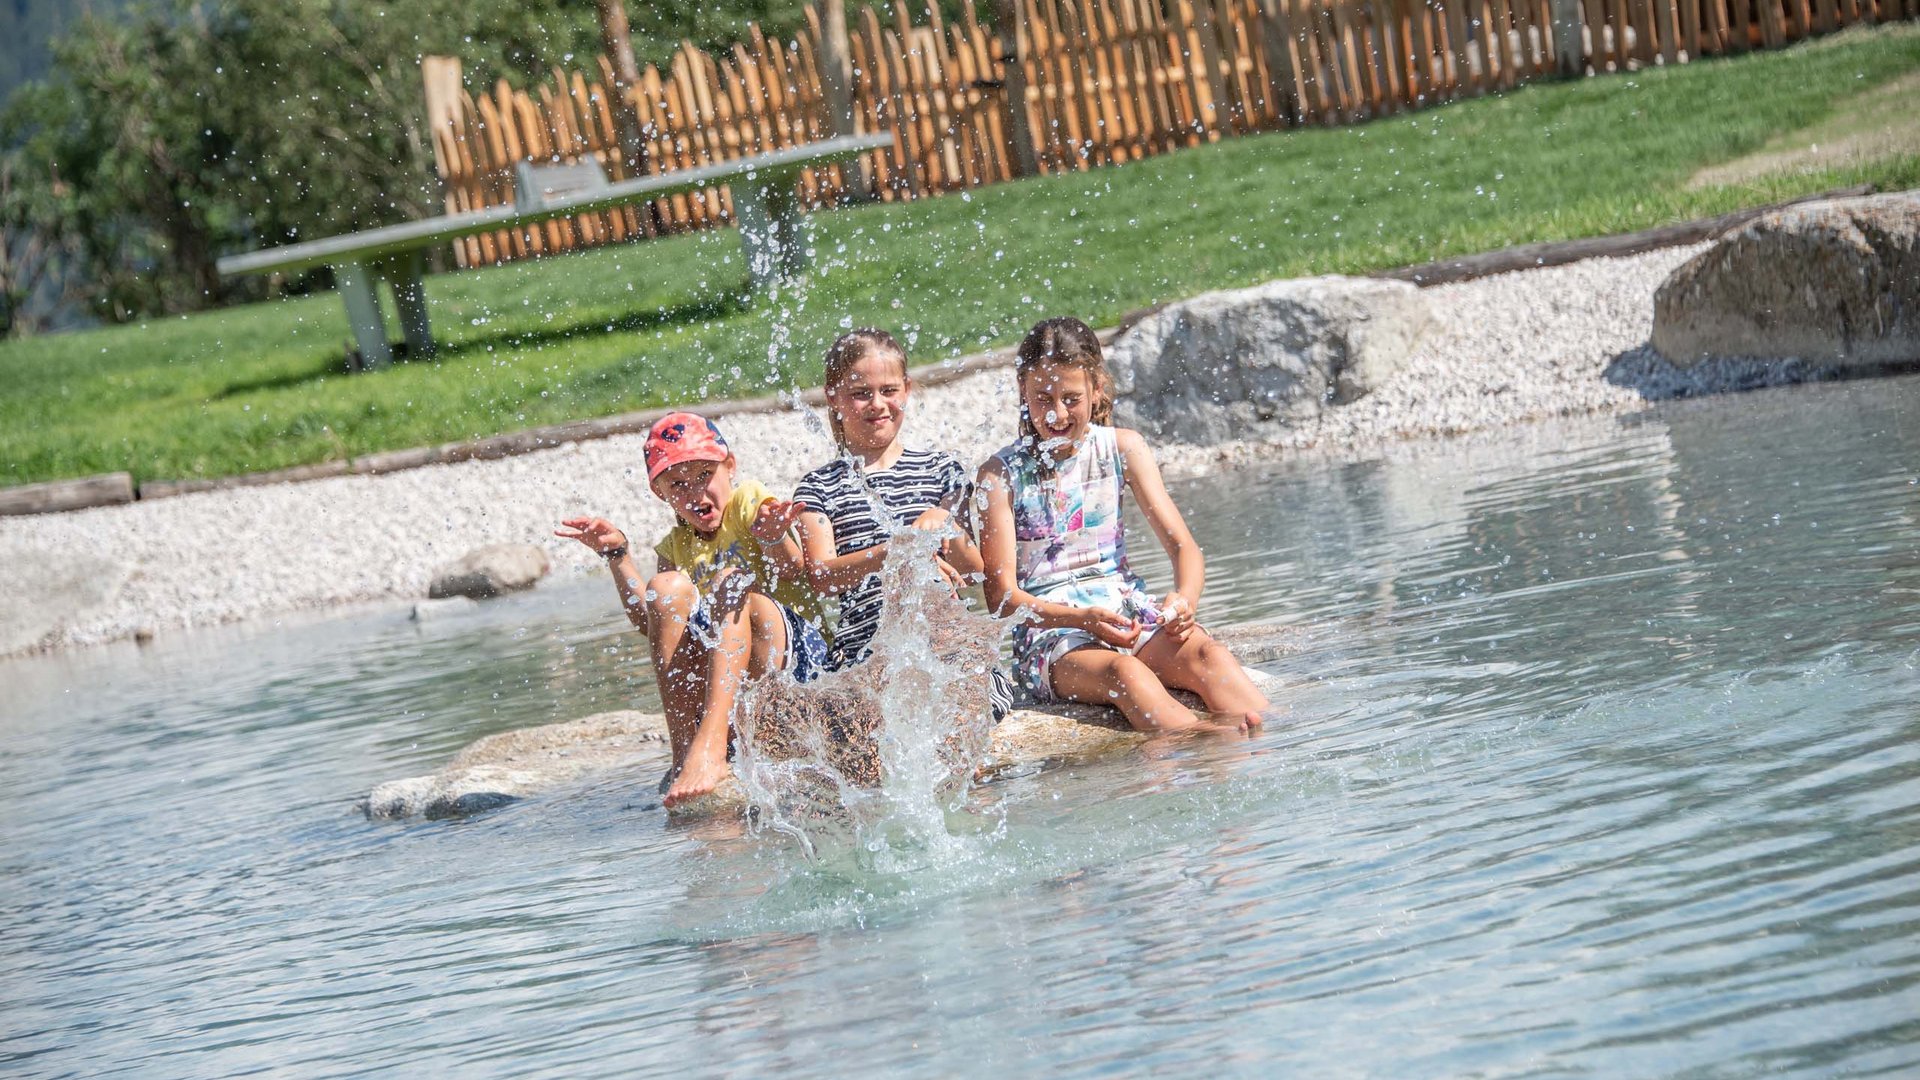 Family-friendly hotel in South Tyrol